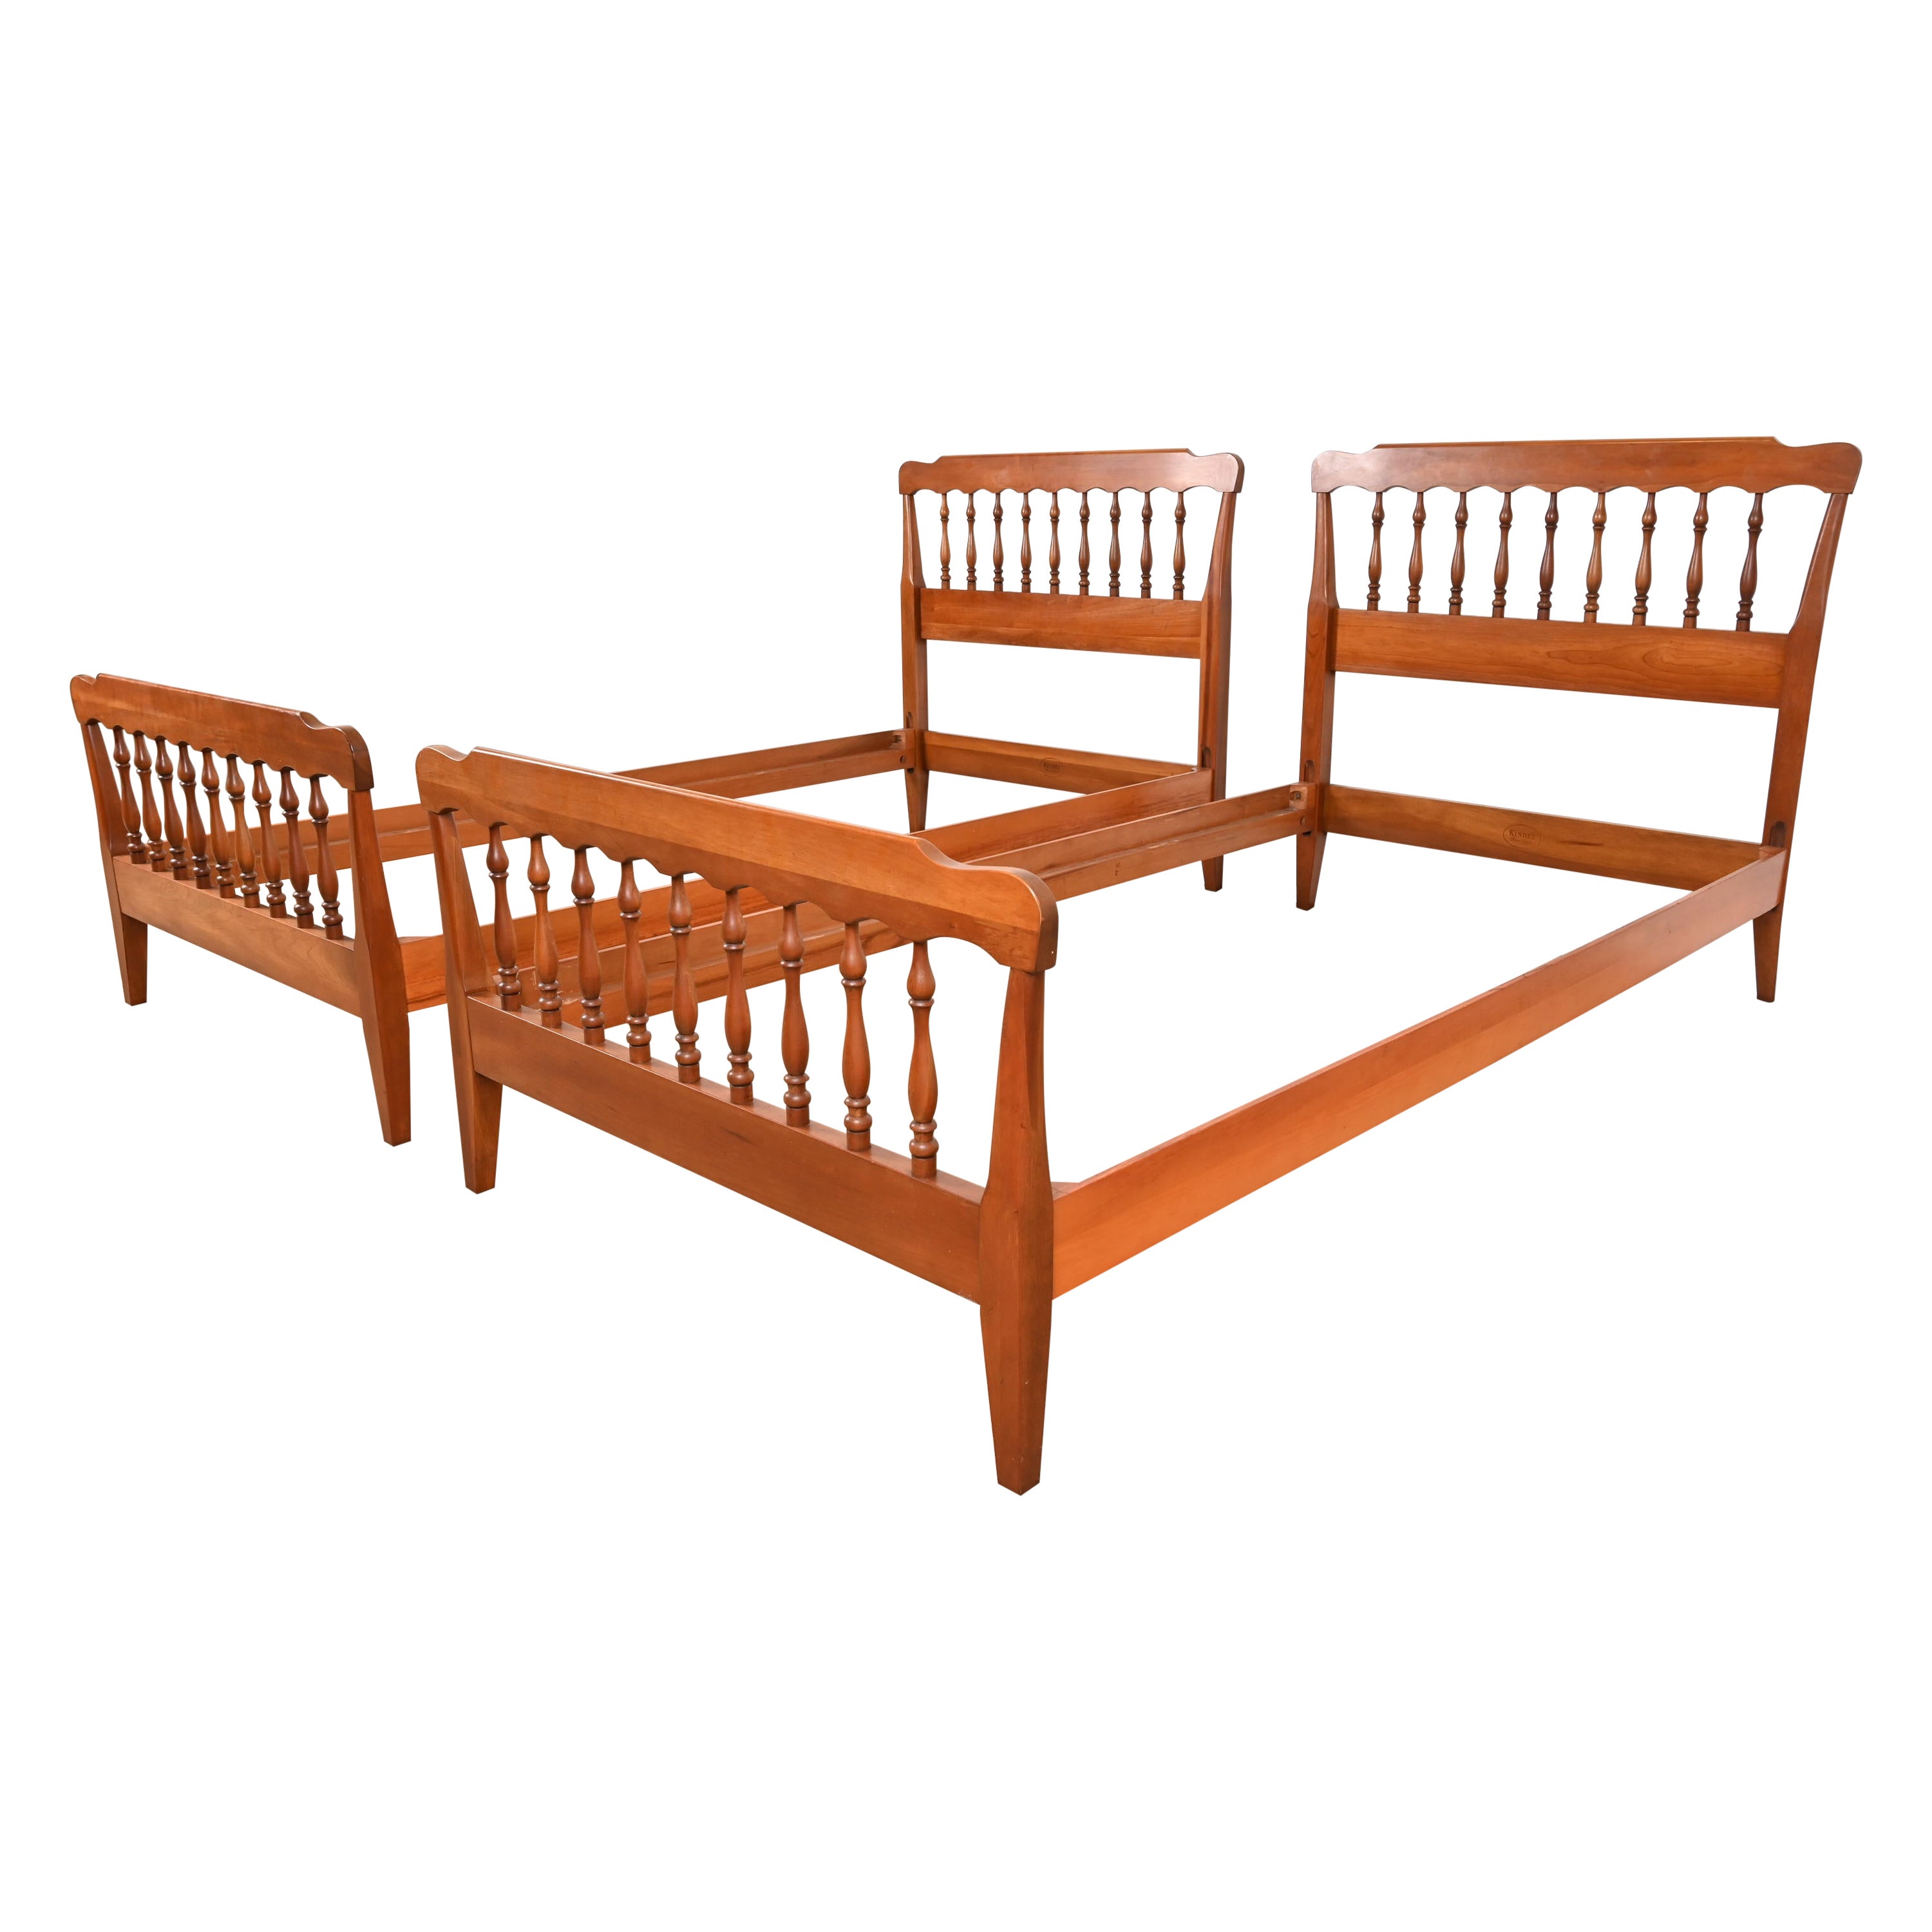 Kindel Furniture American Colonial Carved Cherry Wood Twin Size Spindle Beds For Sale